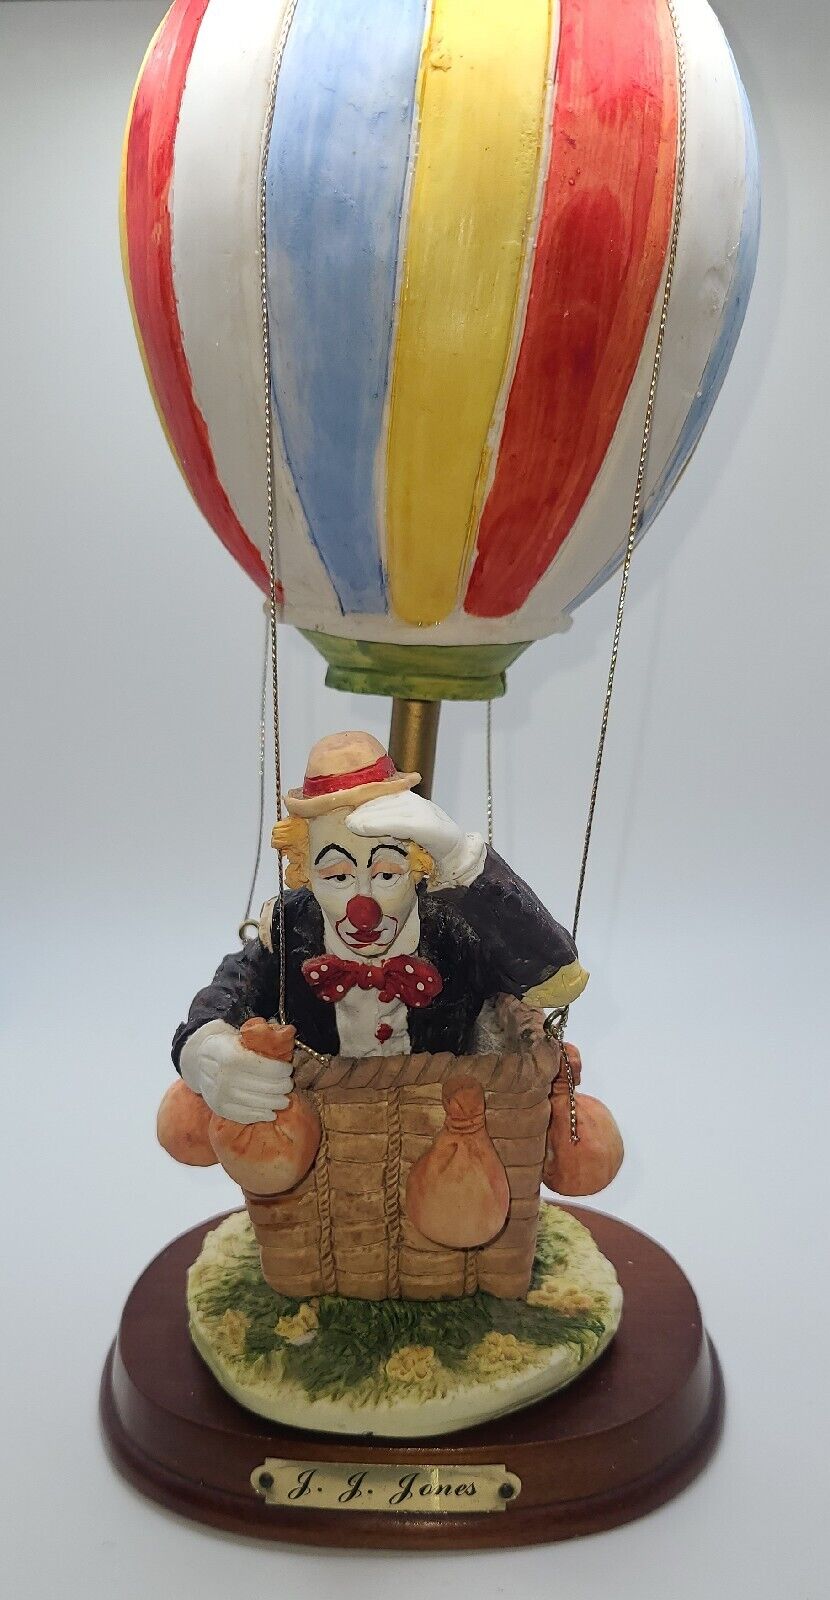 Vintage Davar Hot Air Balloon With Carnival Clown Figure On Wooden Base